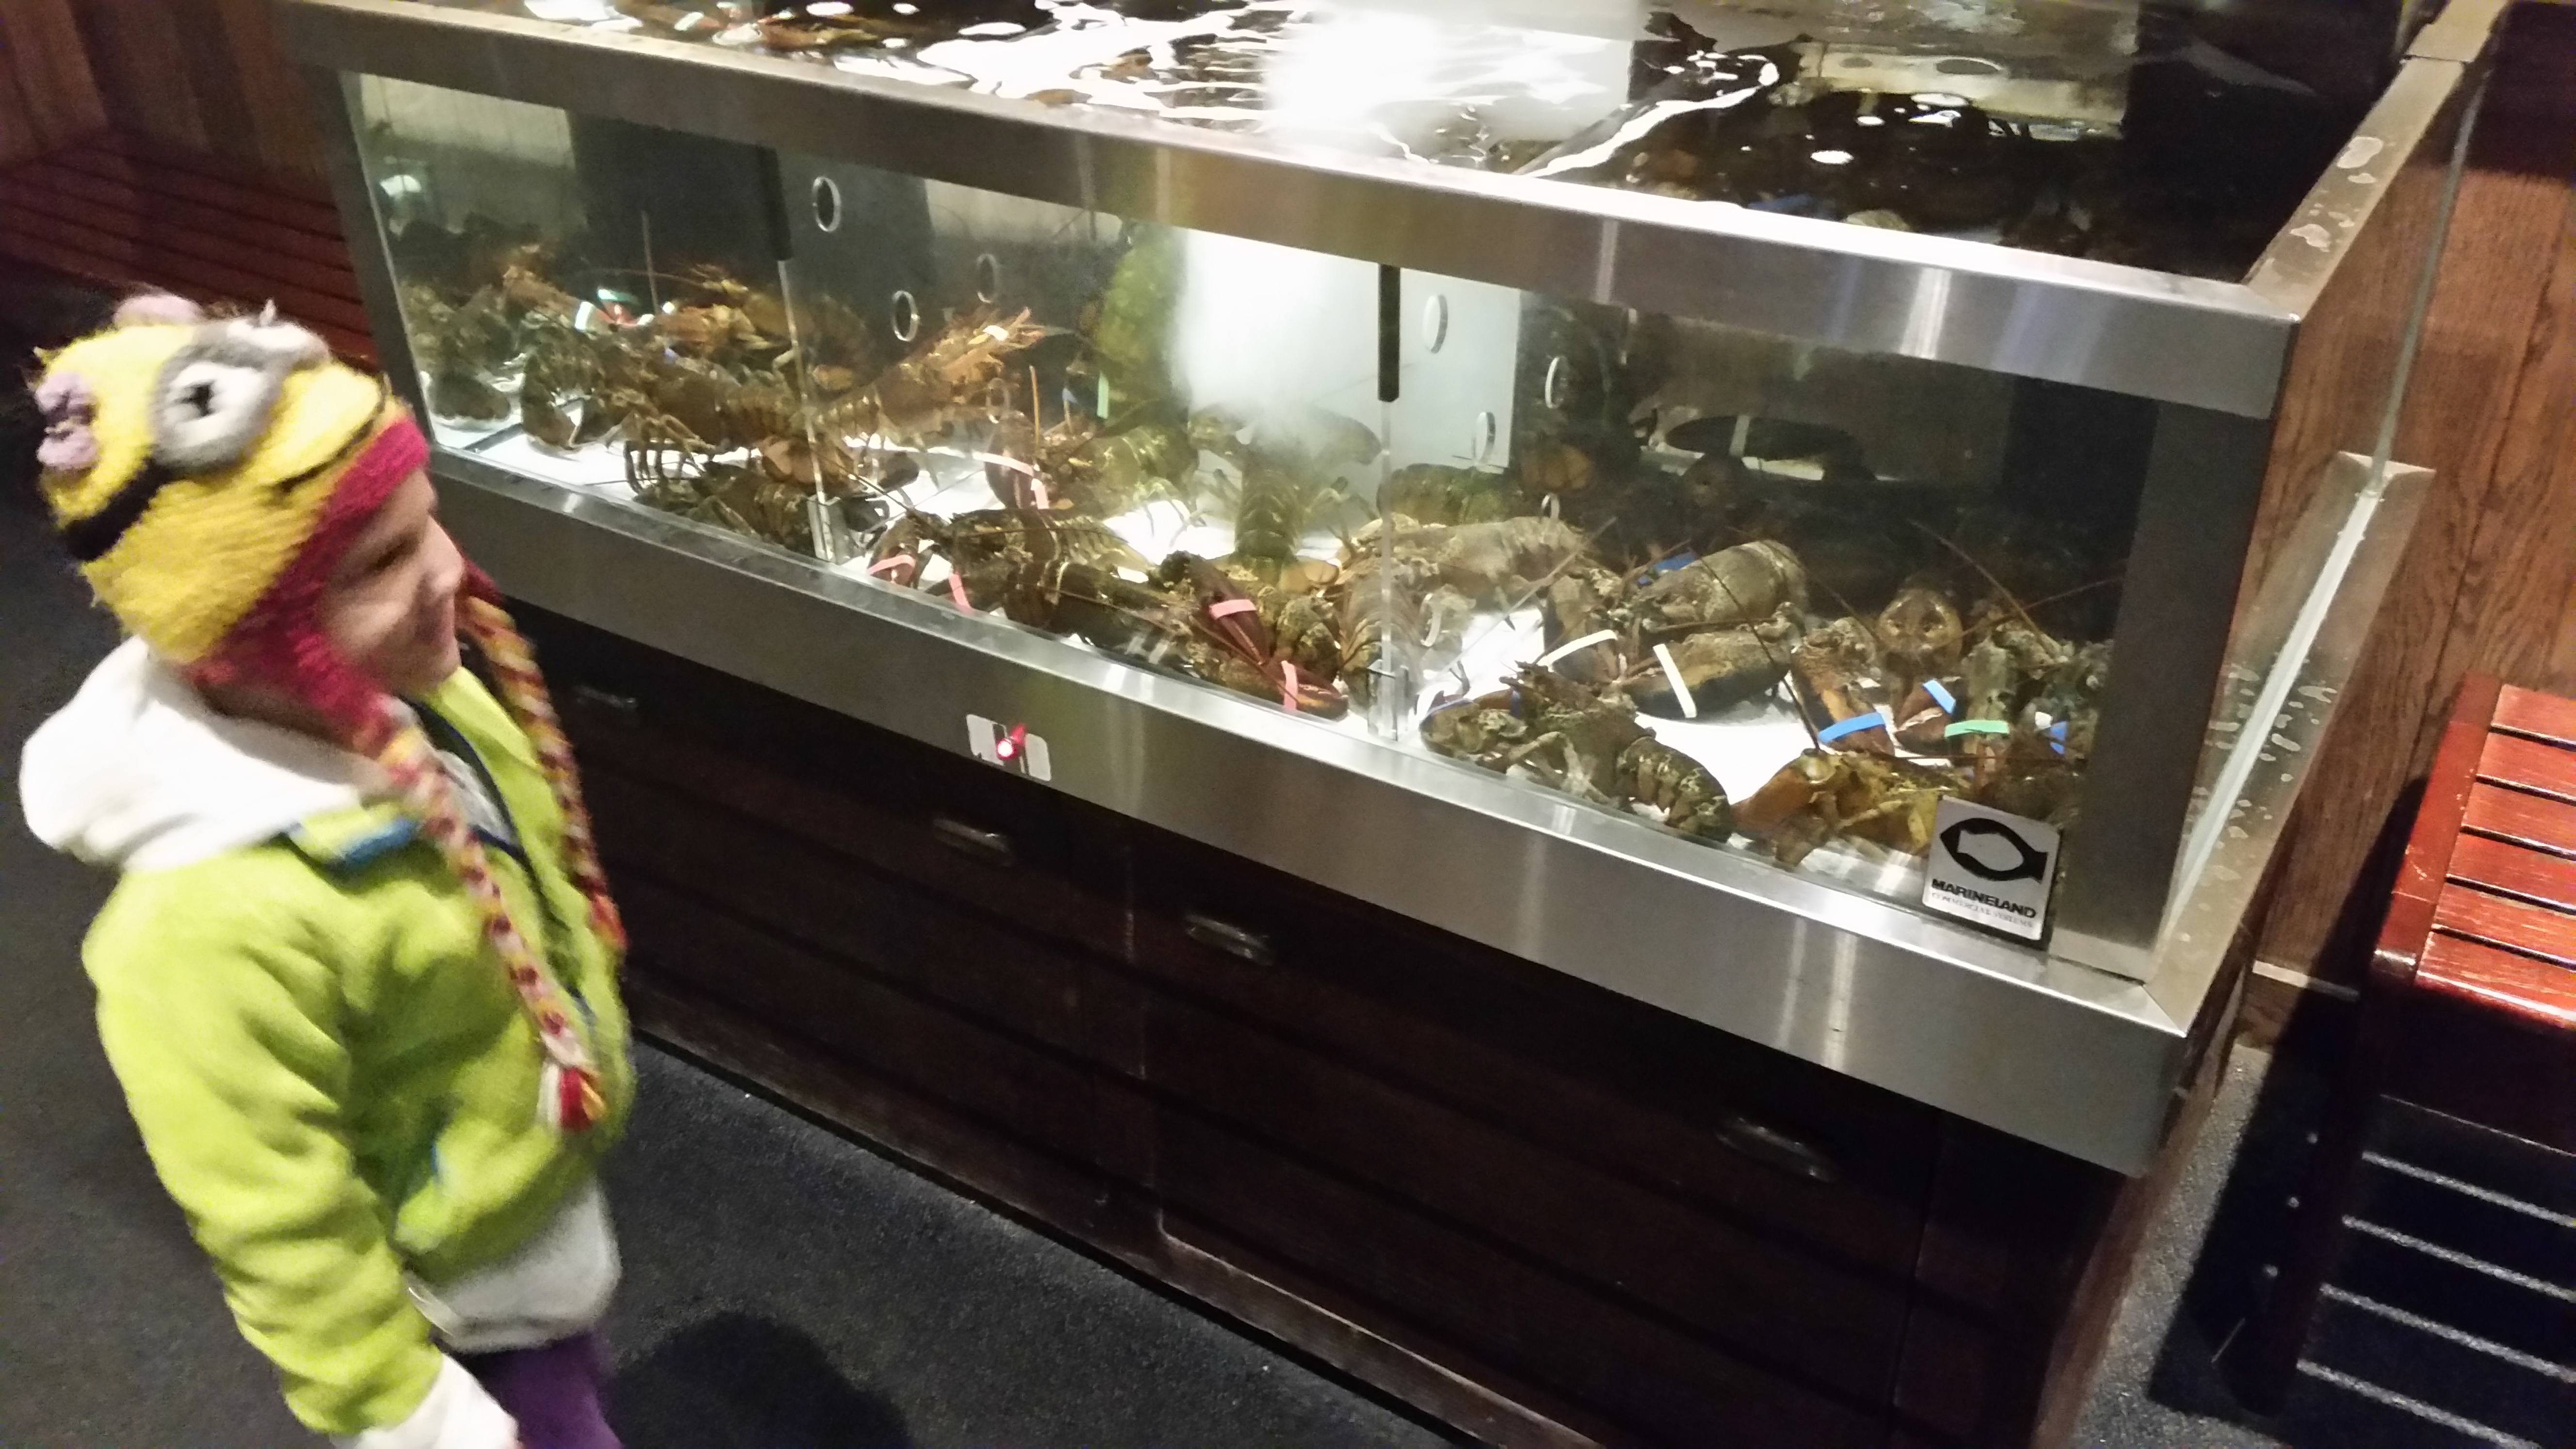 Sam looking at the live lobsters in the tank